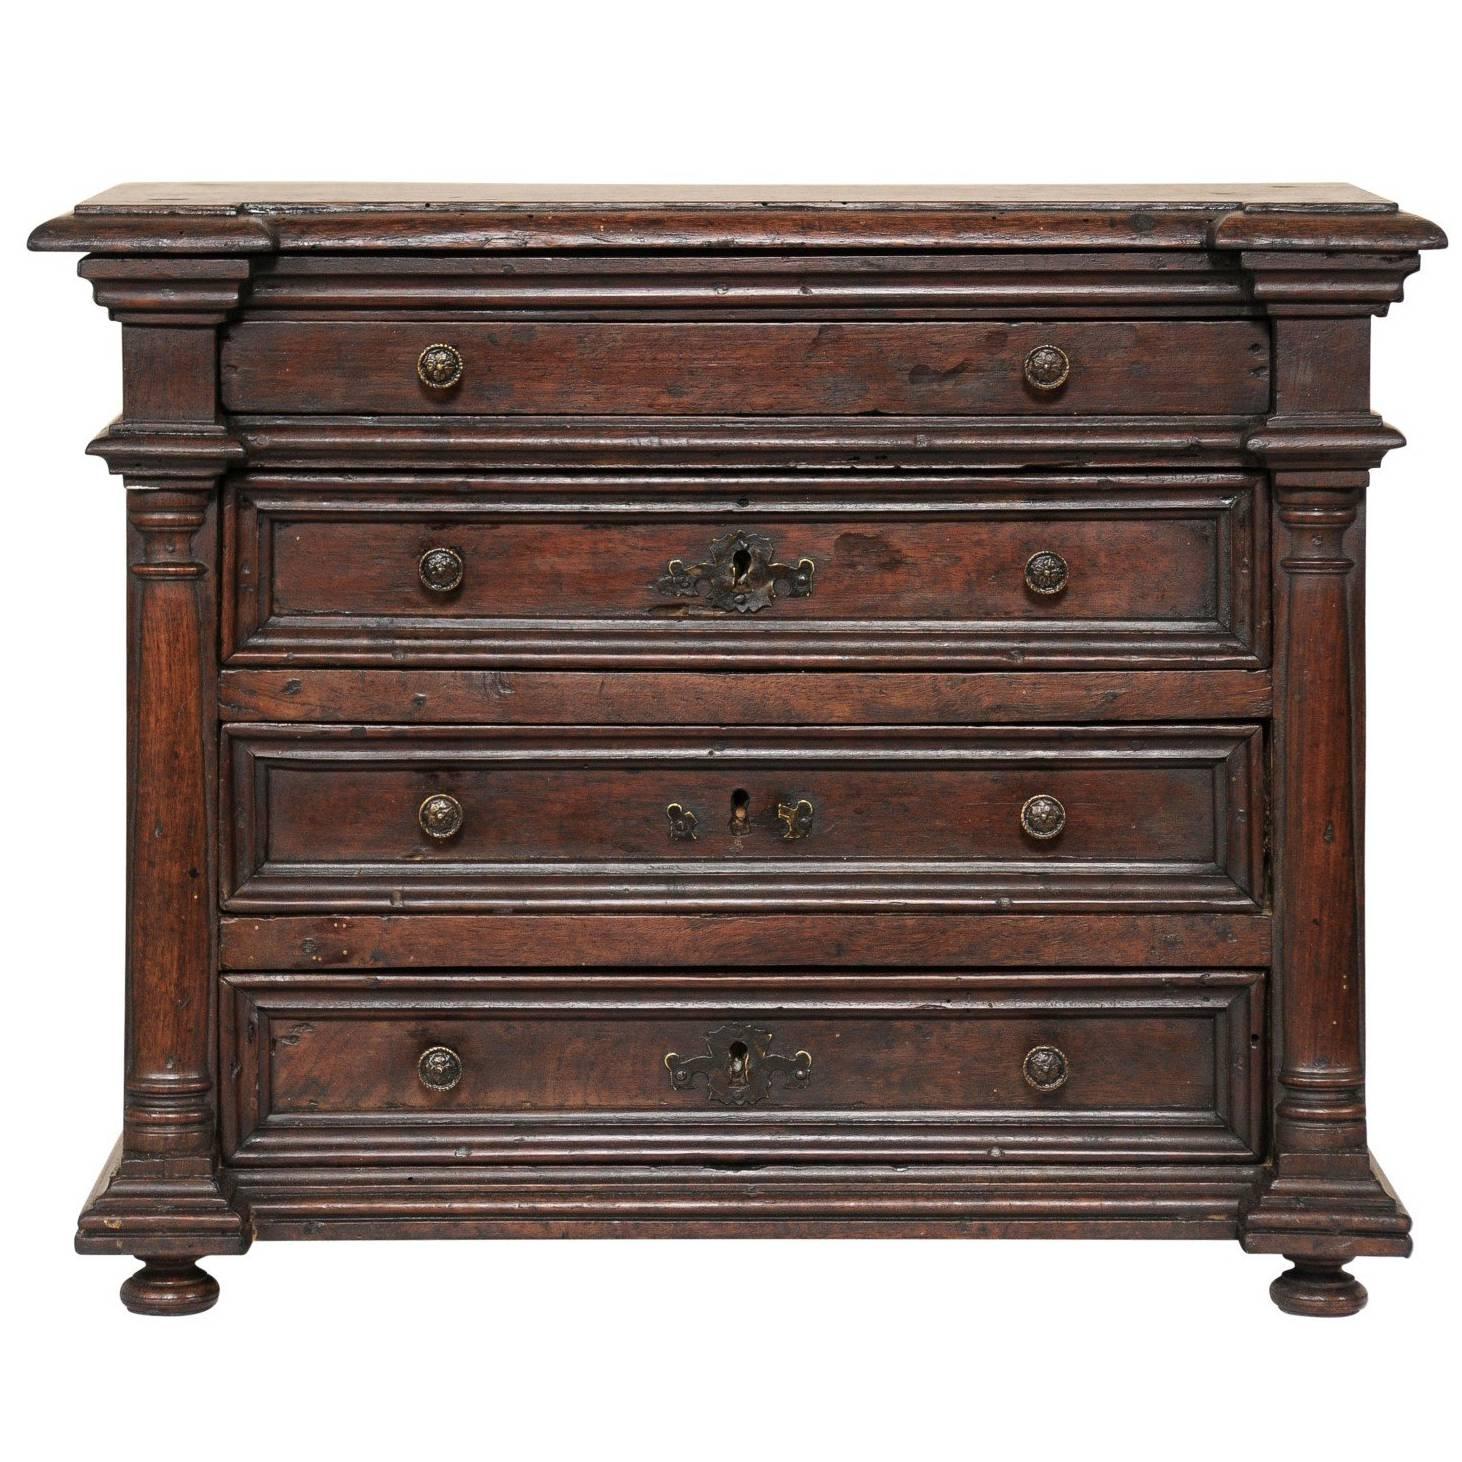 Italian Early 18th Century Petite-Sized Walnut Chest w/Drawers for Table-Top  For Sale